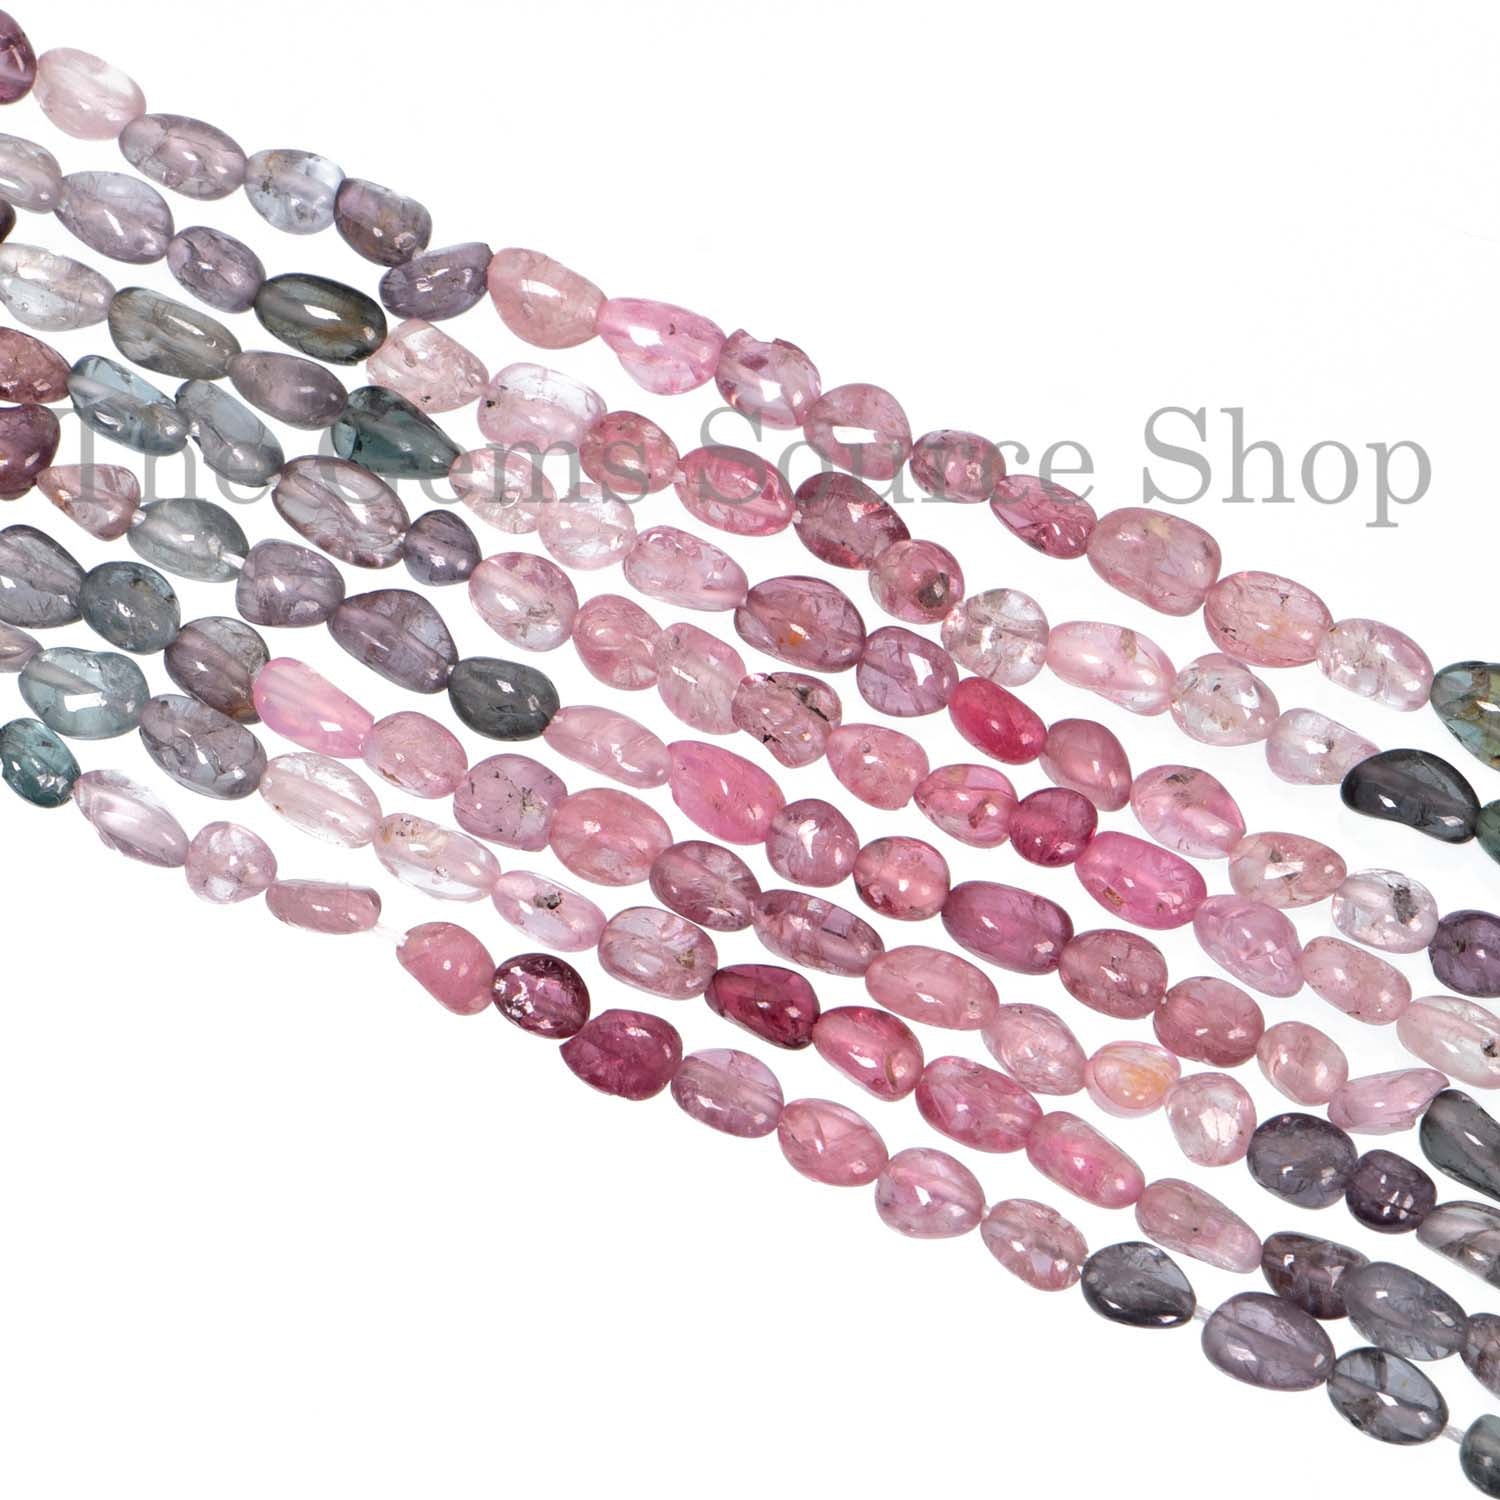 Rare Burma Multi Spinel Oval Briolette, Smooth Gemstone Beads, Spinel Beads